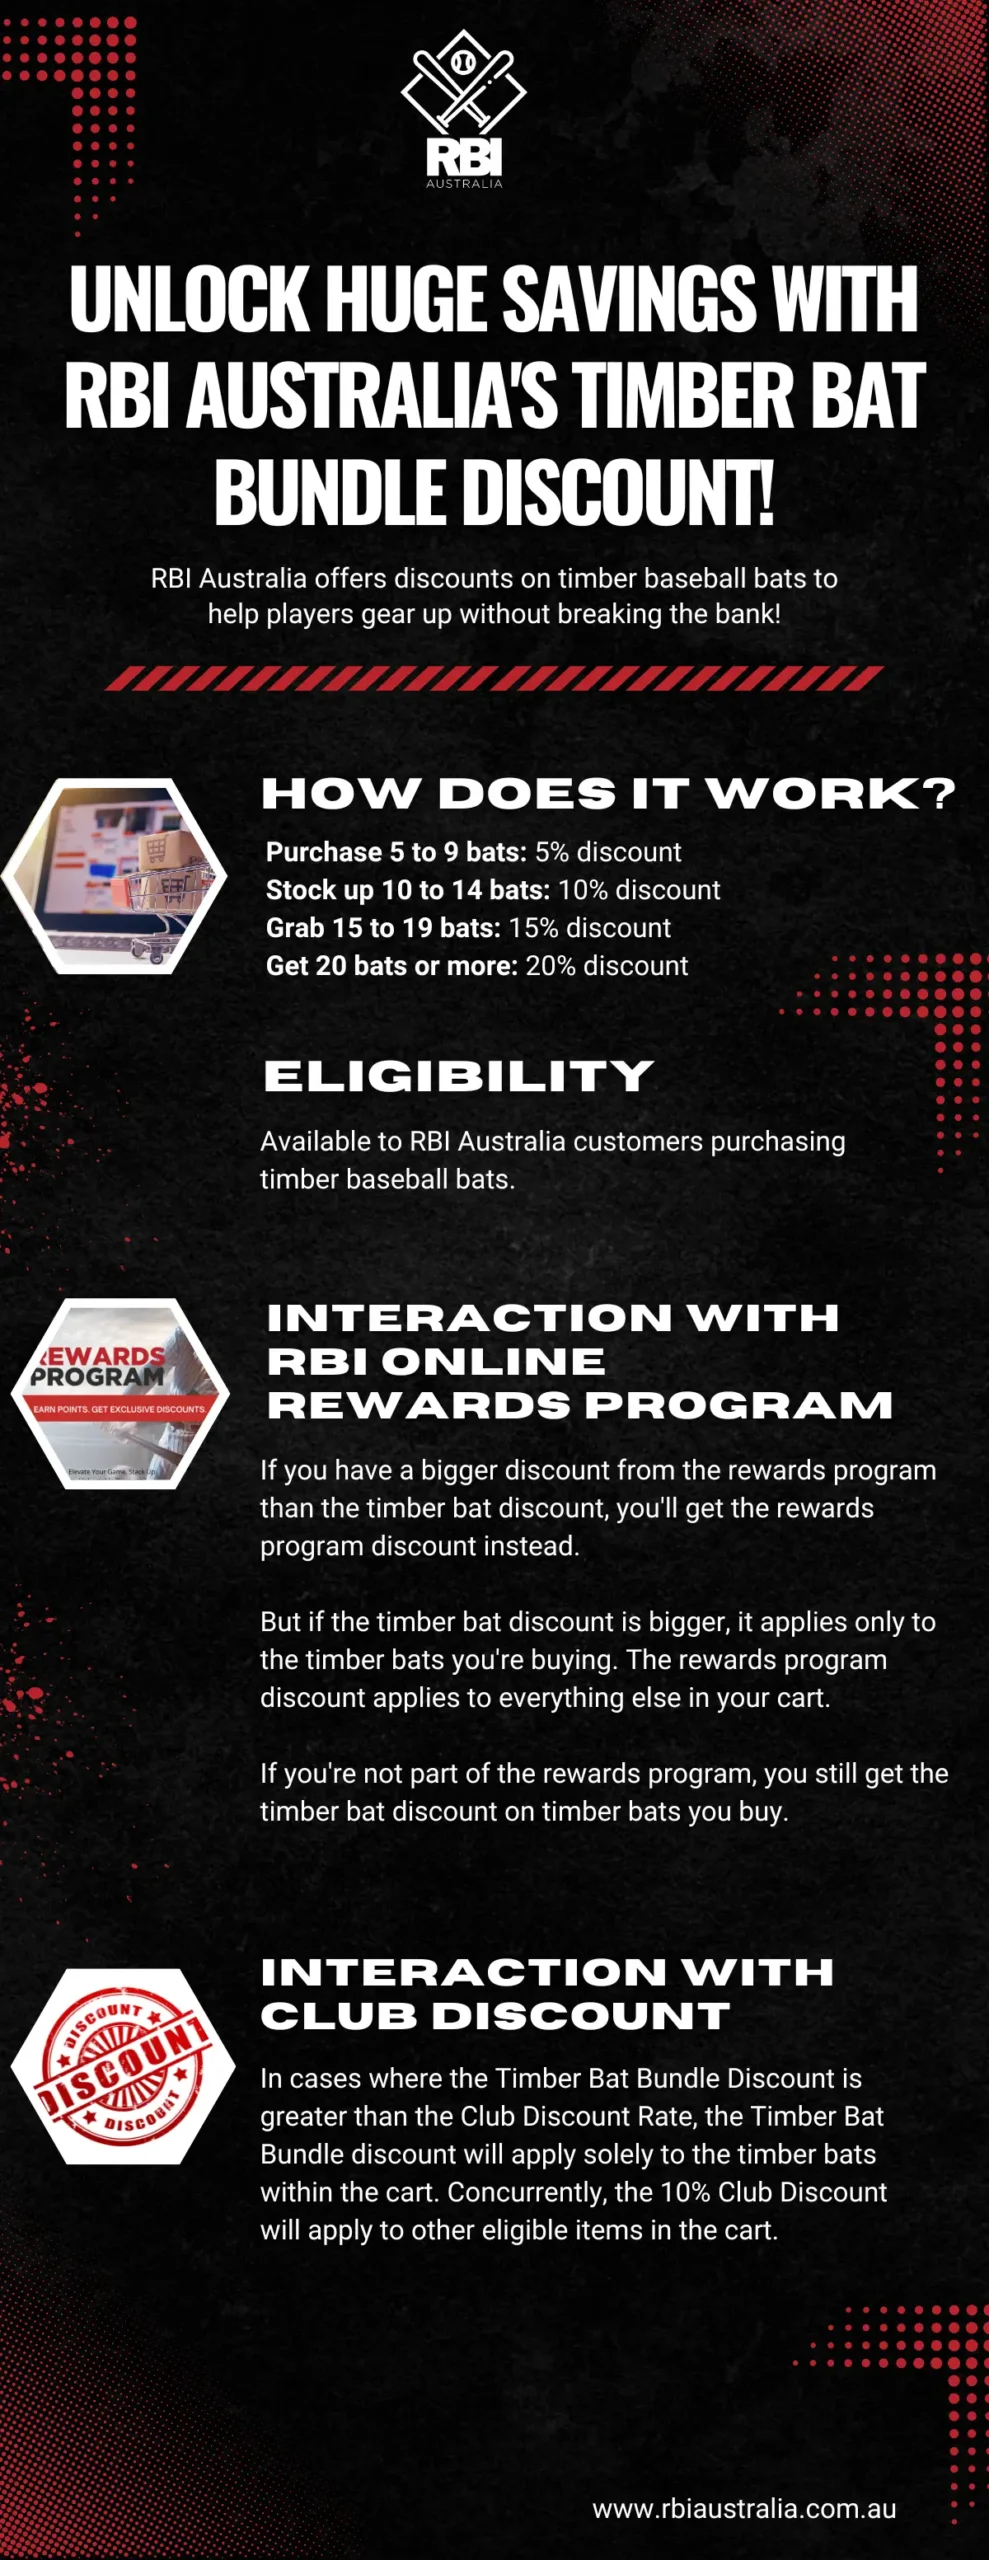 timber bats bundle discount - how it works and how it works when combined with other discount program